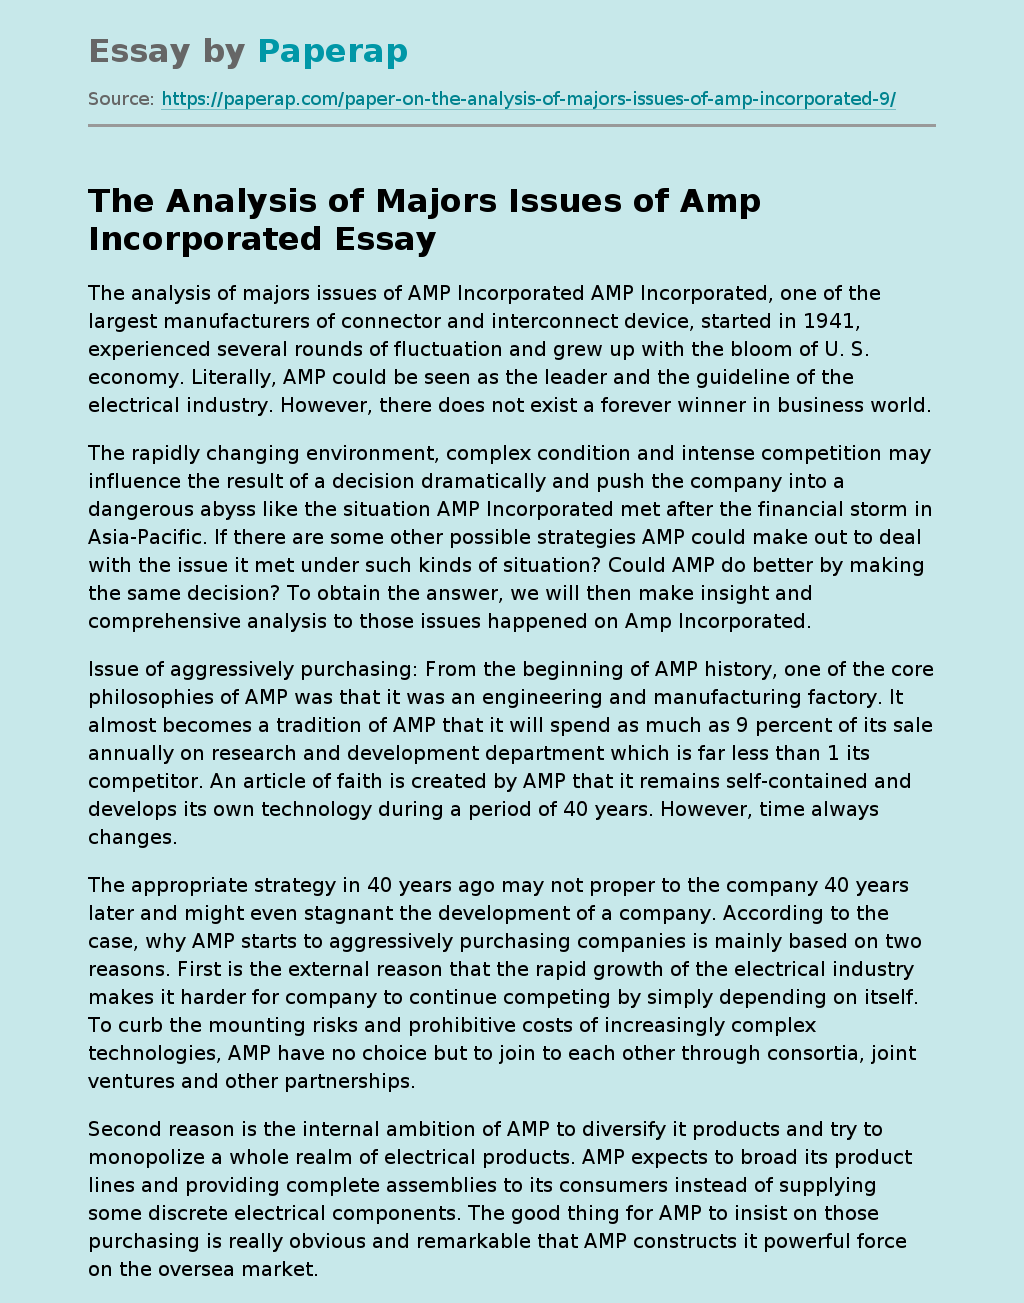 The Analysis of Majors Issues of Amp Incorporated